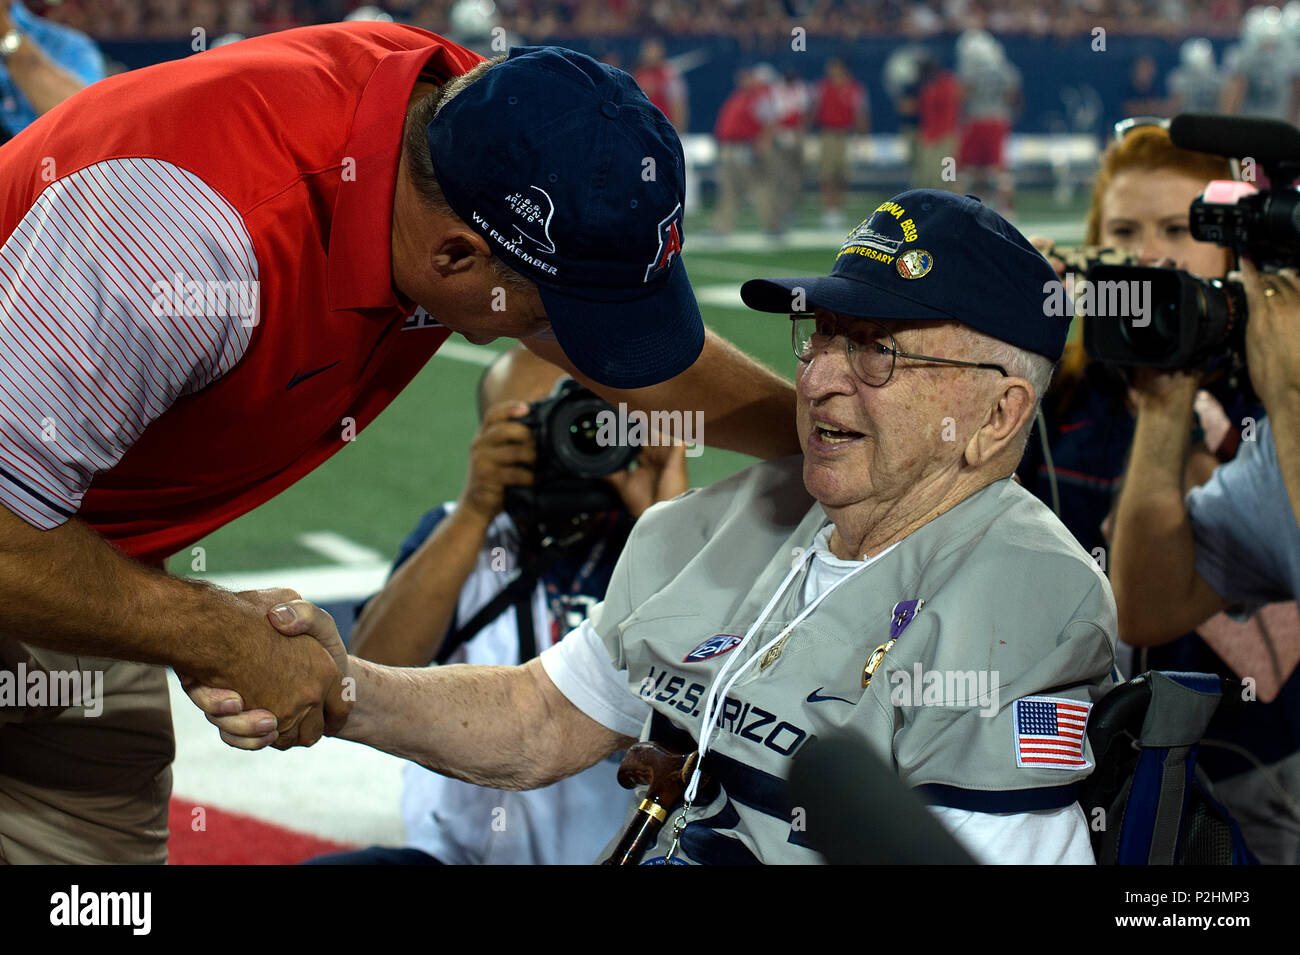 Rich Rodriguez, head coach of the Arizona Wildcats football team, shakes hands with Lauren Bruner, survivor of the Dec. 7, 1941 attack on Pearl Harbor, at Arizona Stadium in Tucson, Ariz., Sept. 17, 2016. Bruner was honored throughout the Arizona Wildcats vs. Hawaii Rainbow Warriors football game commemorating the 75th anniversary of the Japanese attack on Pearl Harbor Dec. 7, 1941. (U.S. Air Force photo by Senior Airman Chris Drzazgowski) Stock Photo